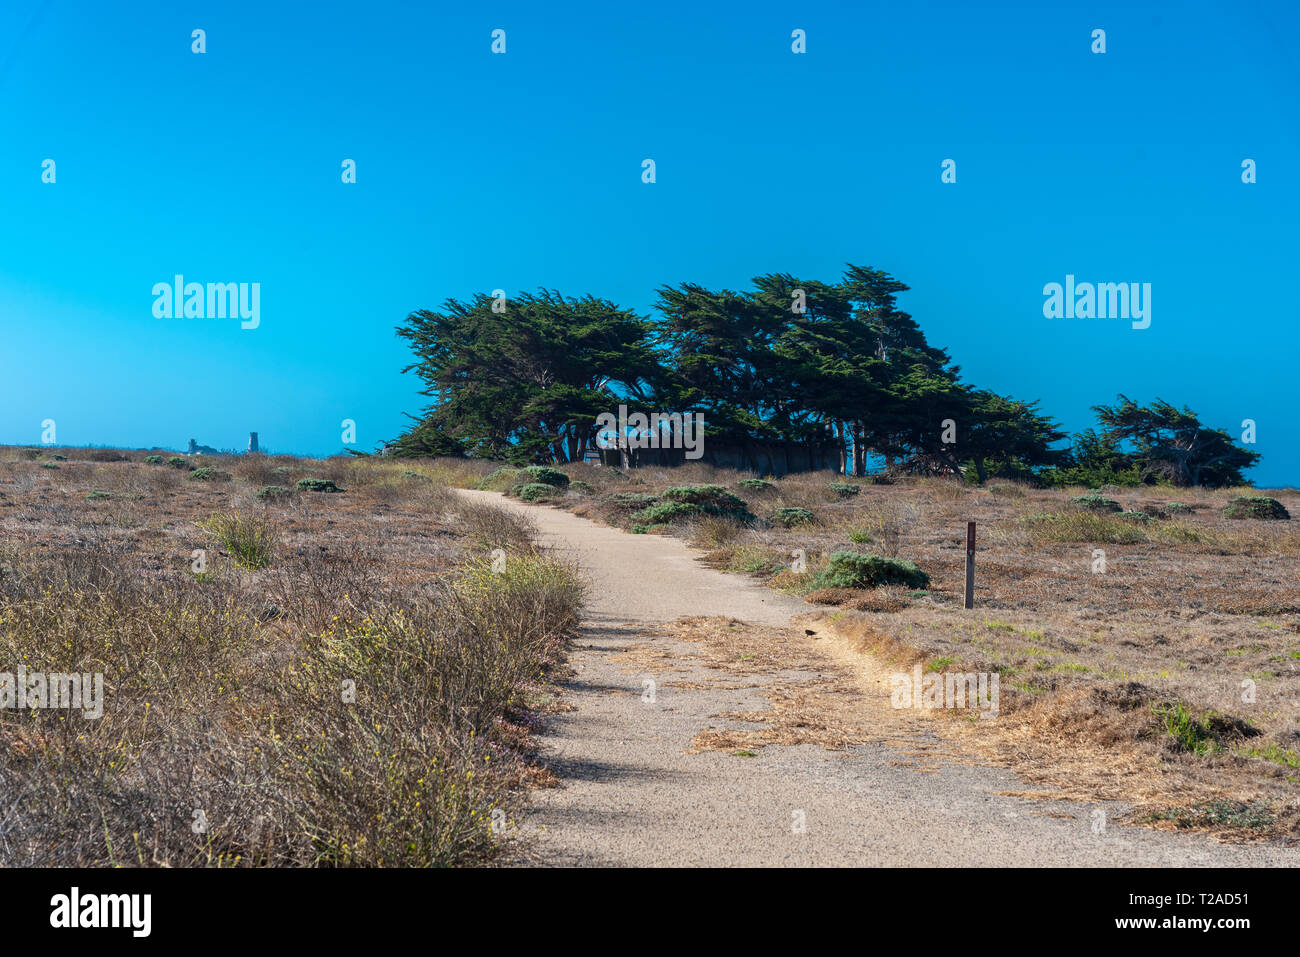 Unpaved road leading to grove of trees under bright blue sky. Stock Photo